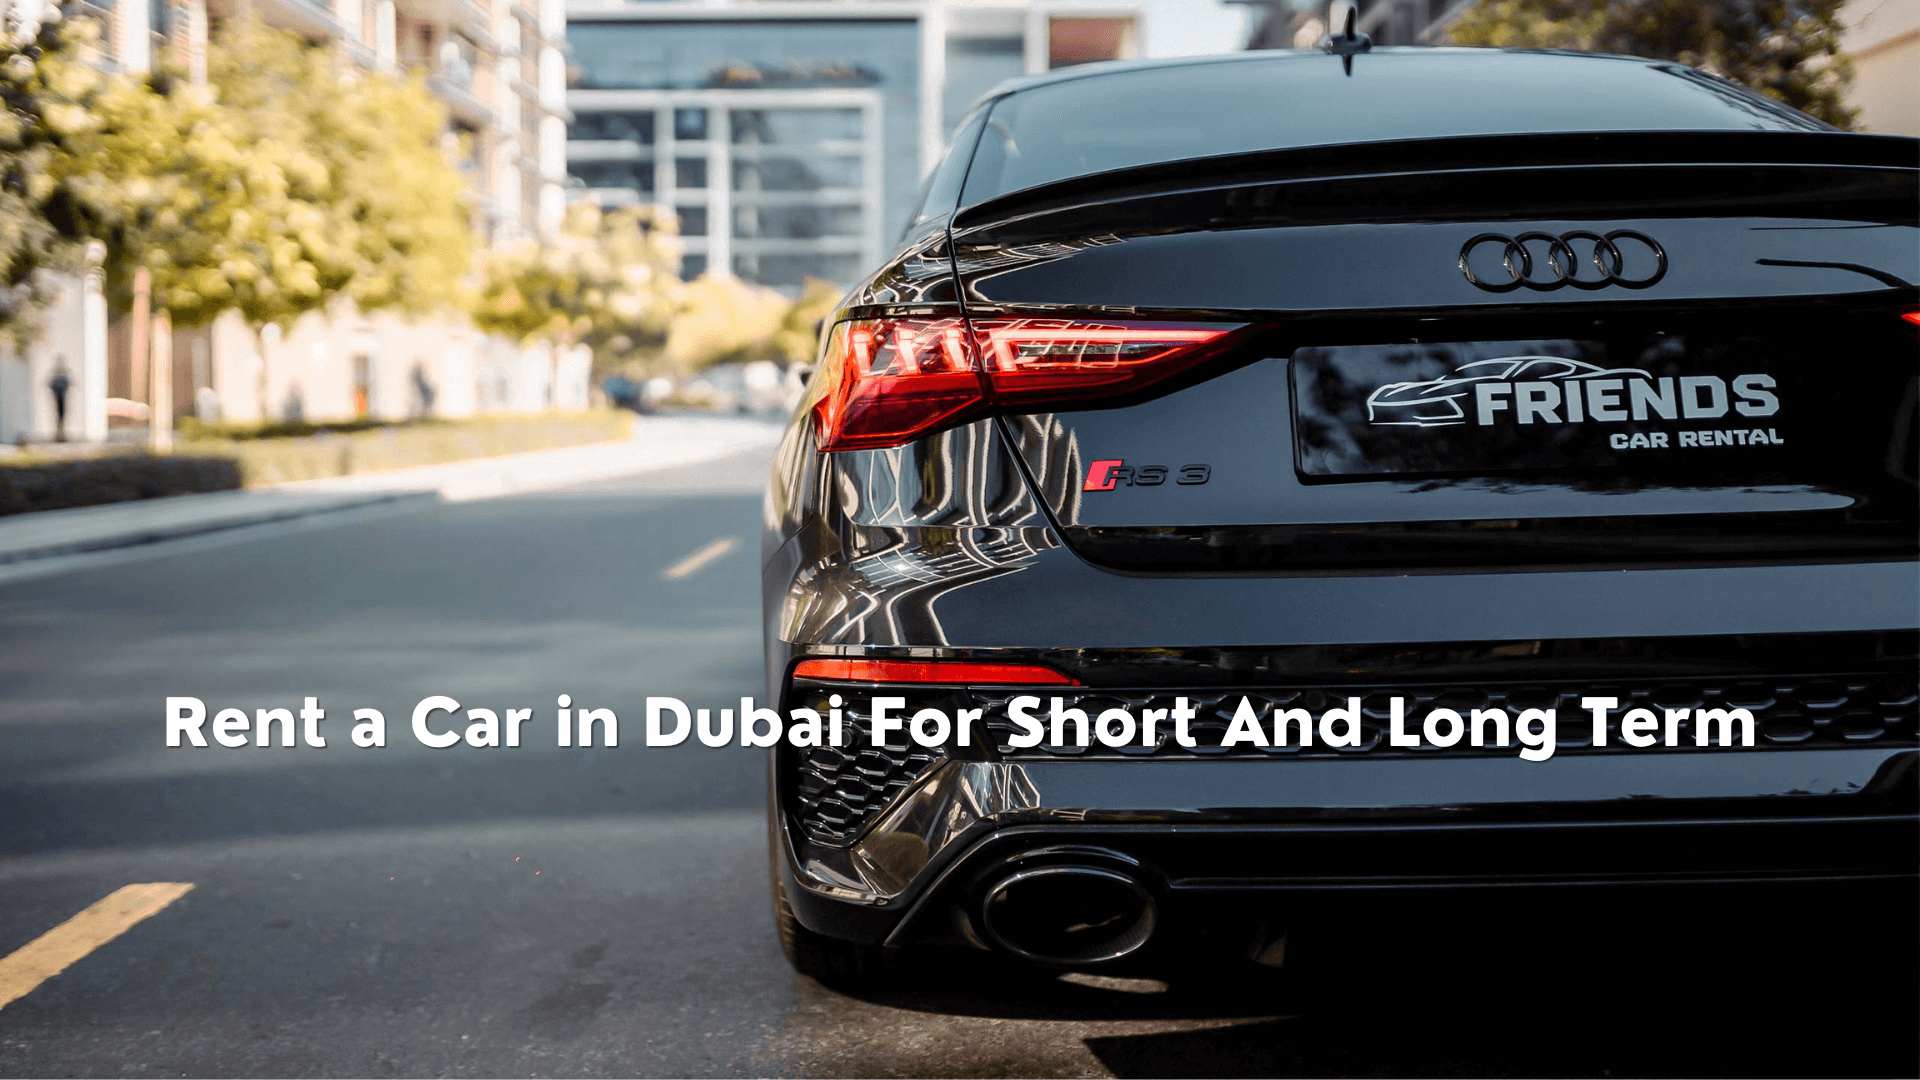 Rent a Car in Dubai For Short And Long Term